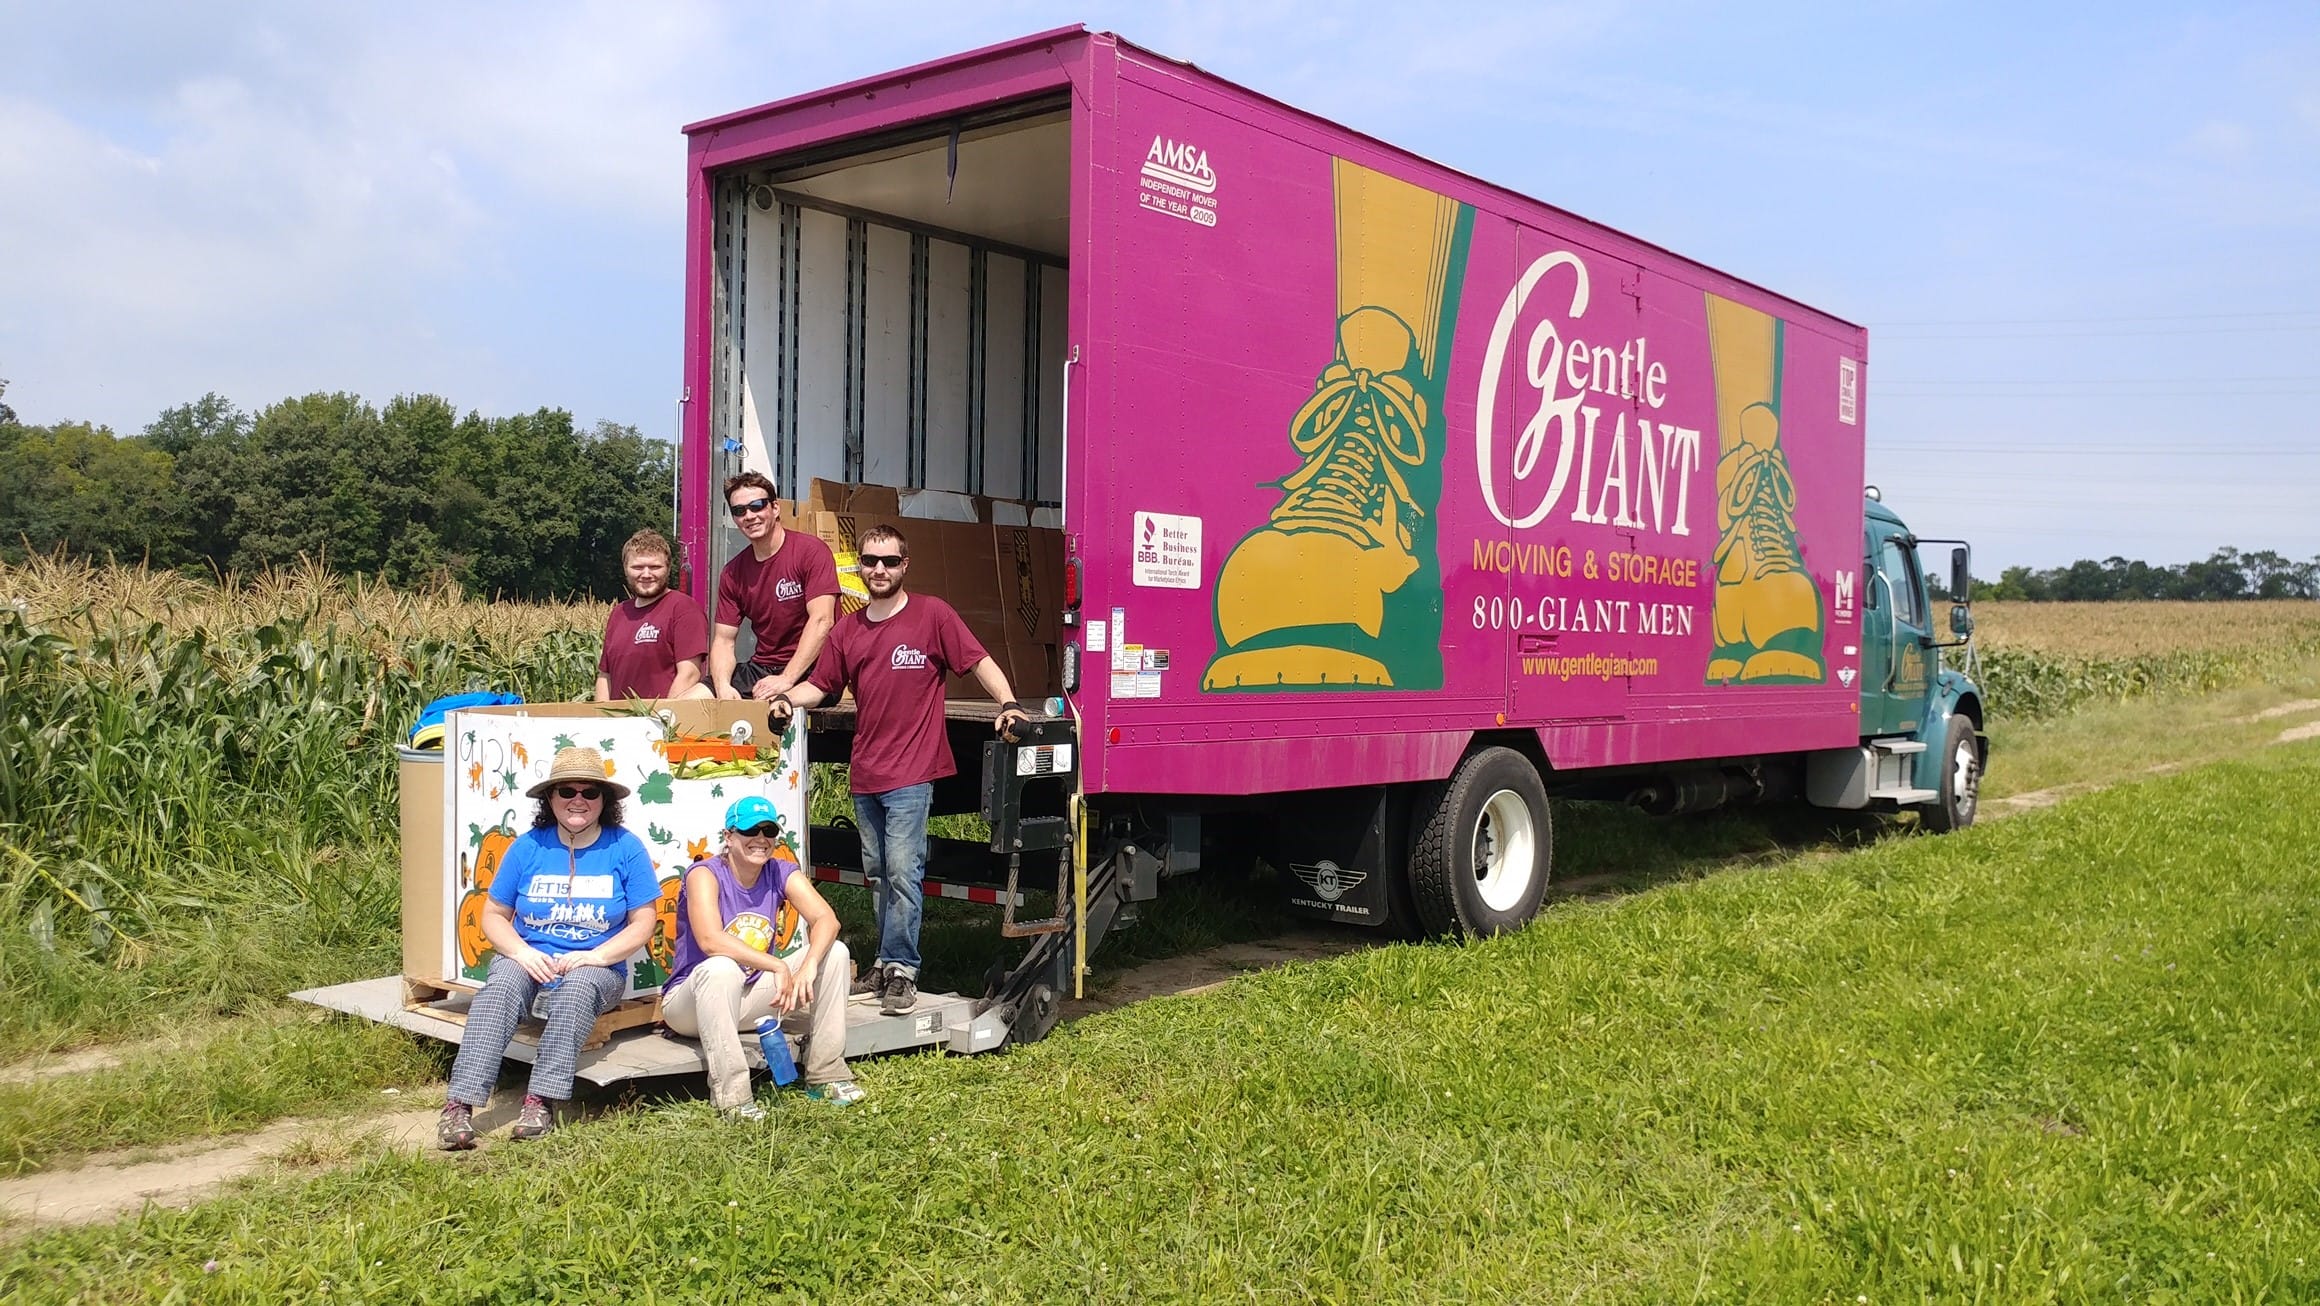 Gentle Giant Philadelphia Collaborates with Philabundance and Move for Hunger